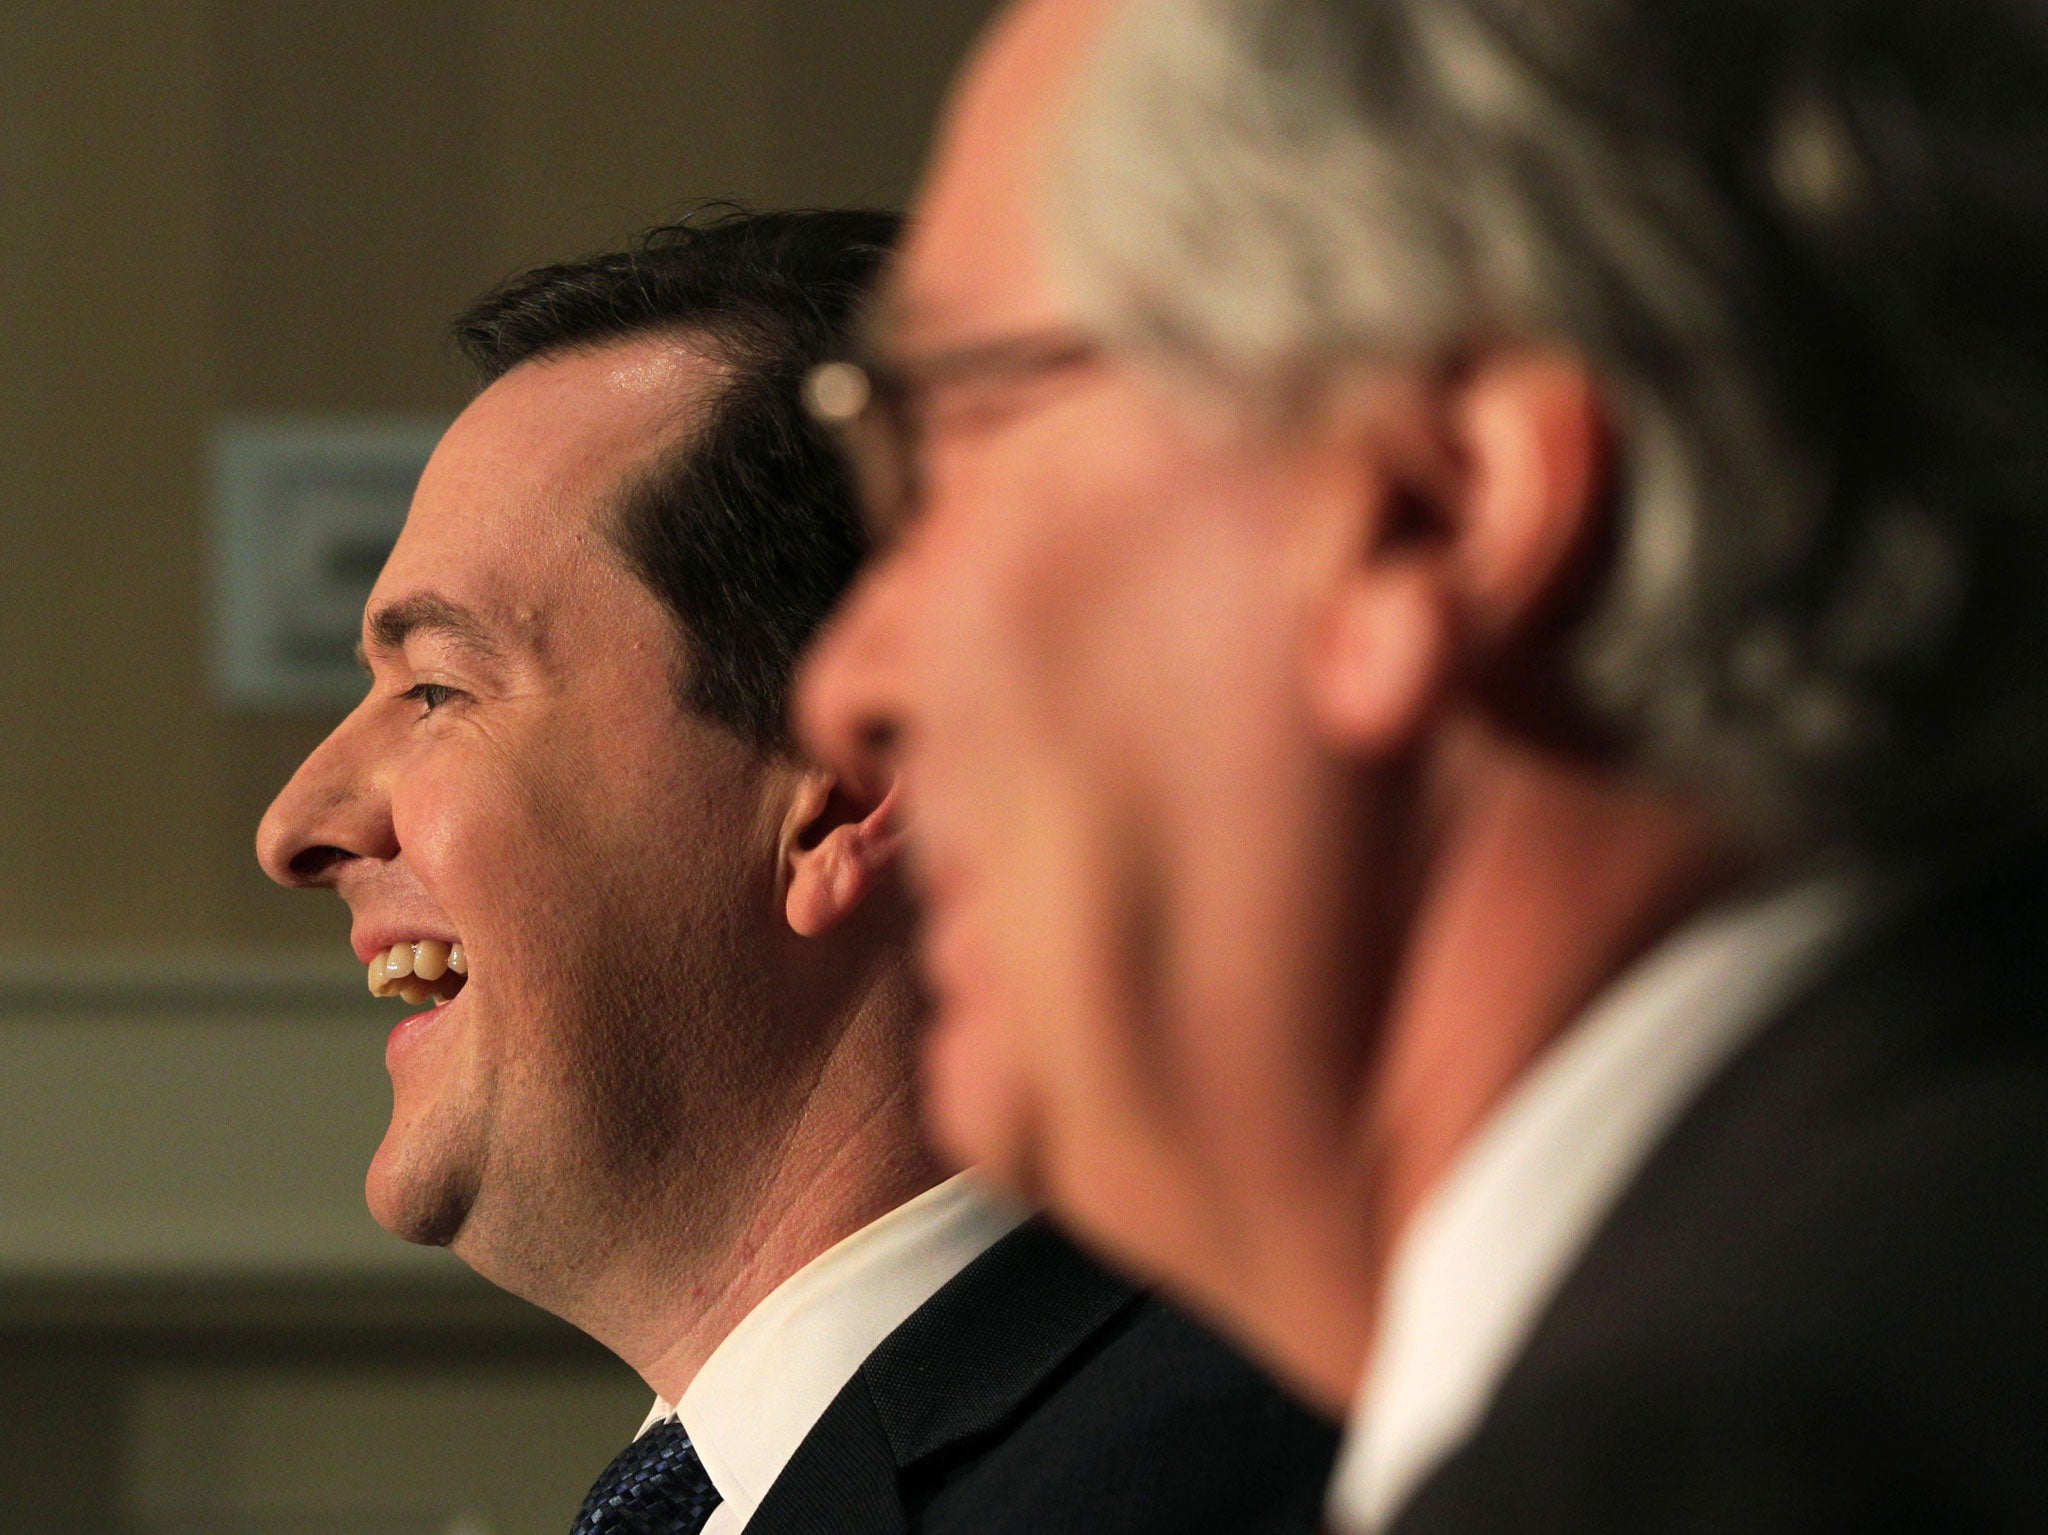 George Osborne (L) Chancellor of the Exchequer and Mervyn King, Governor of the Bank of England, attend the closing press conference of the G7 Finance Ministers and central bank governors summit at Hartwell House on May 11, 2013 Aylesbury, Buckinghamshire, England.